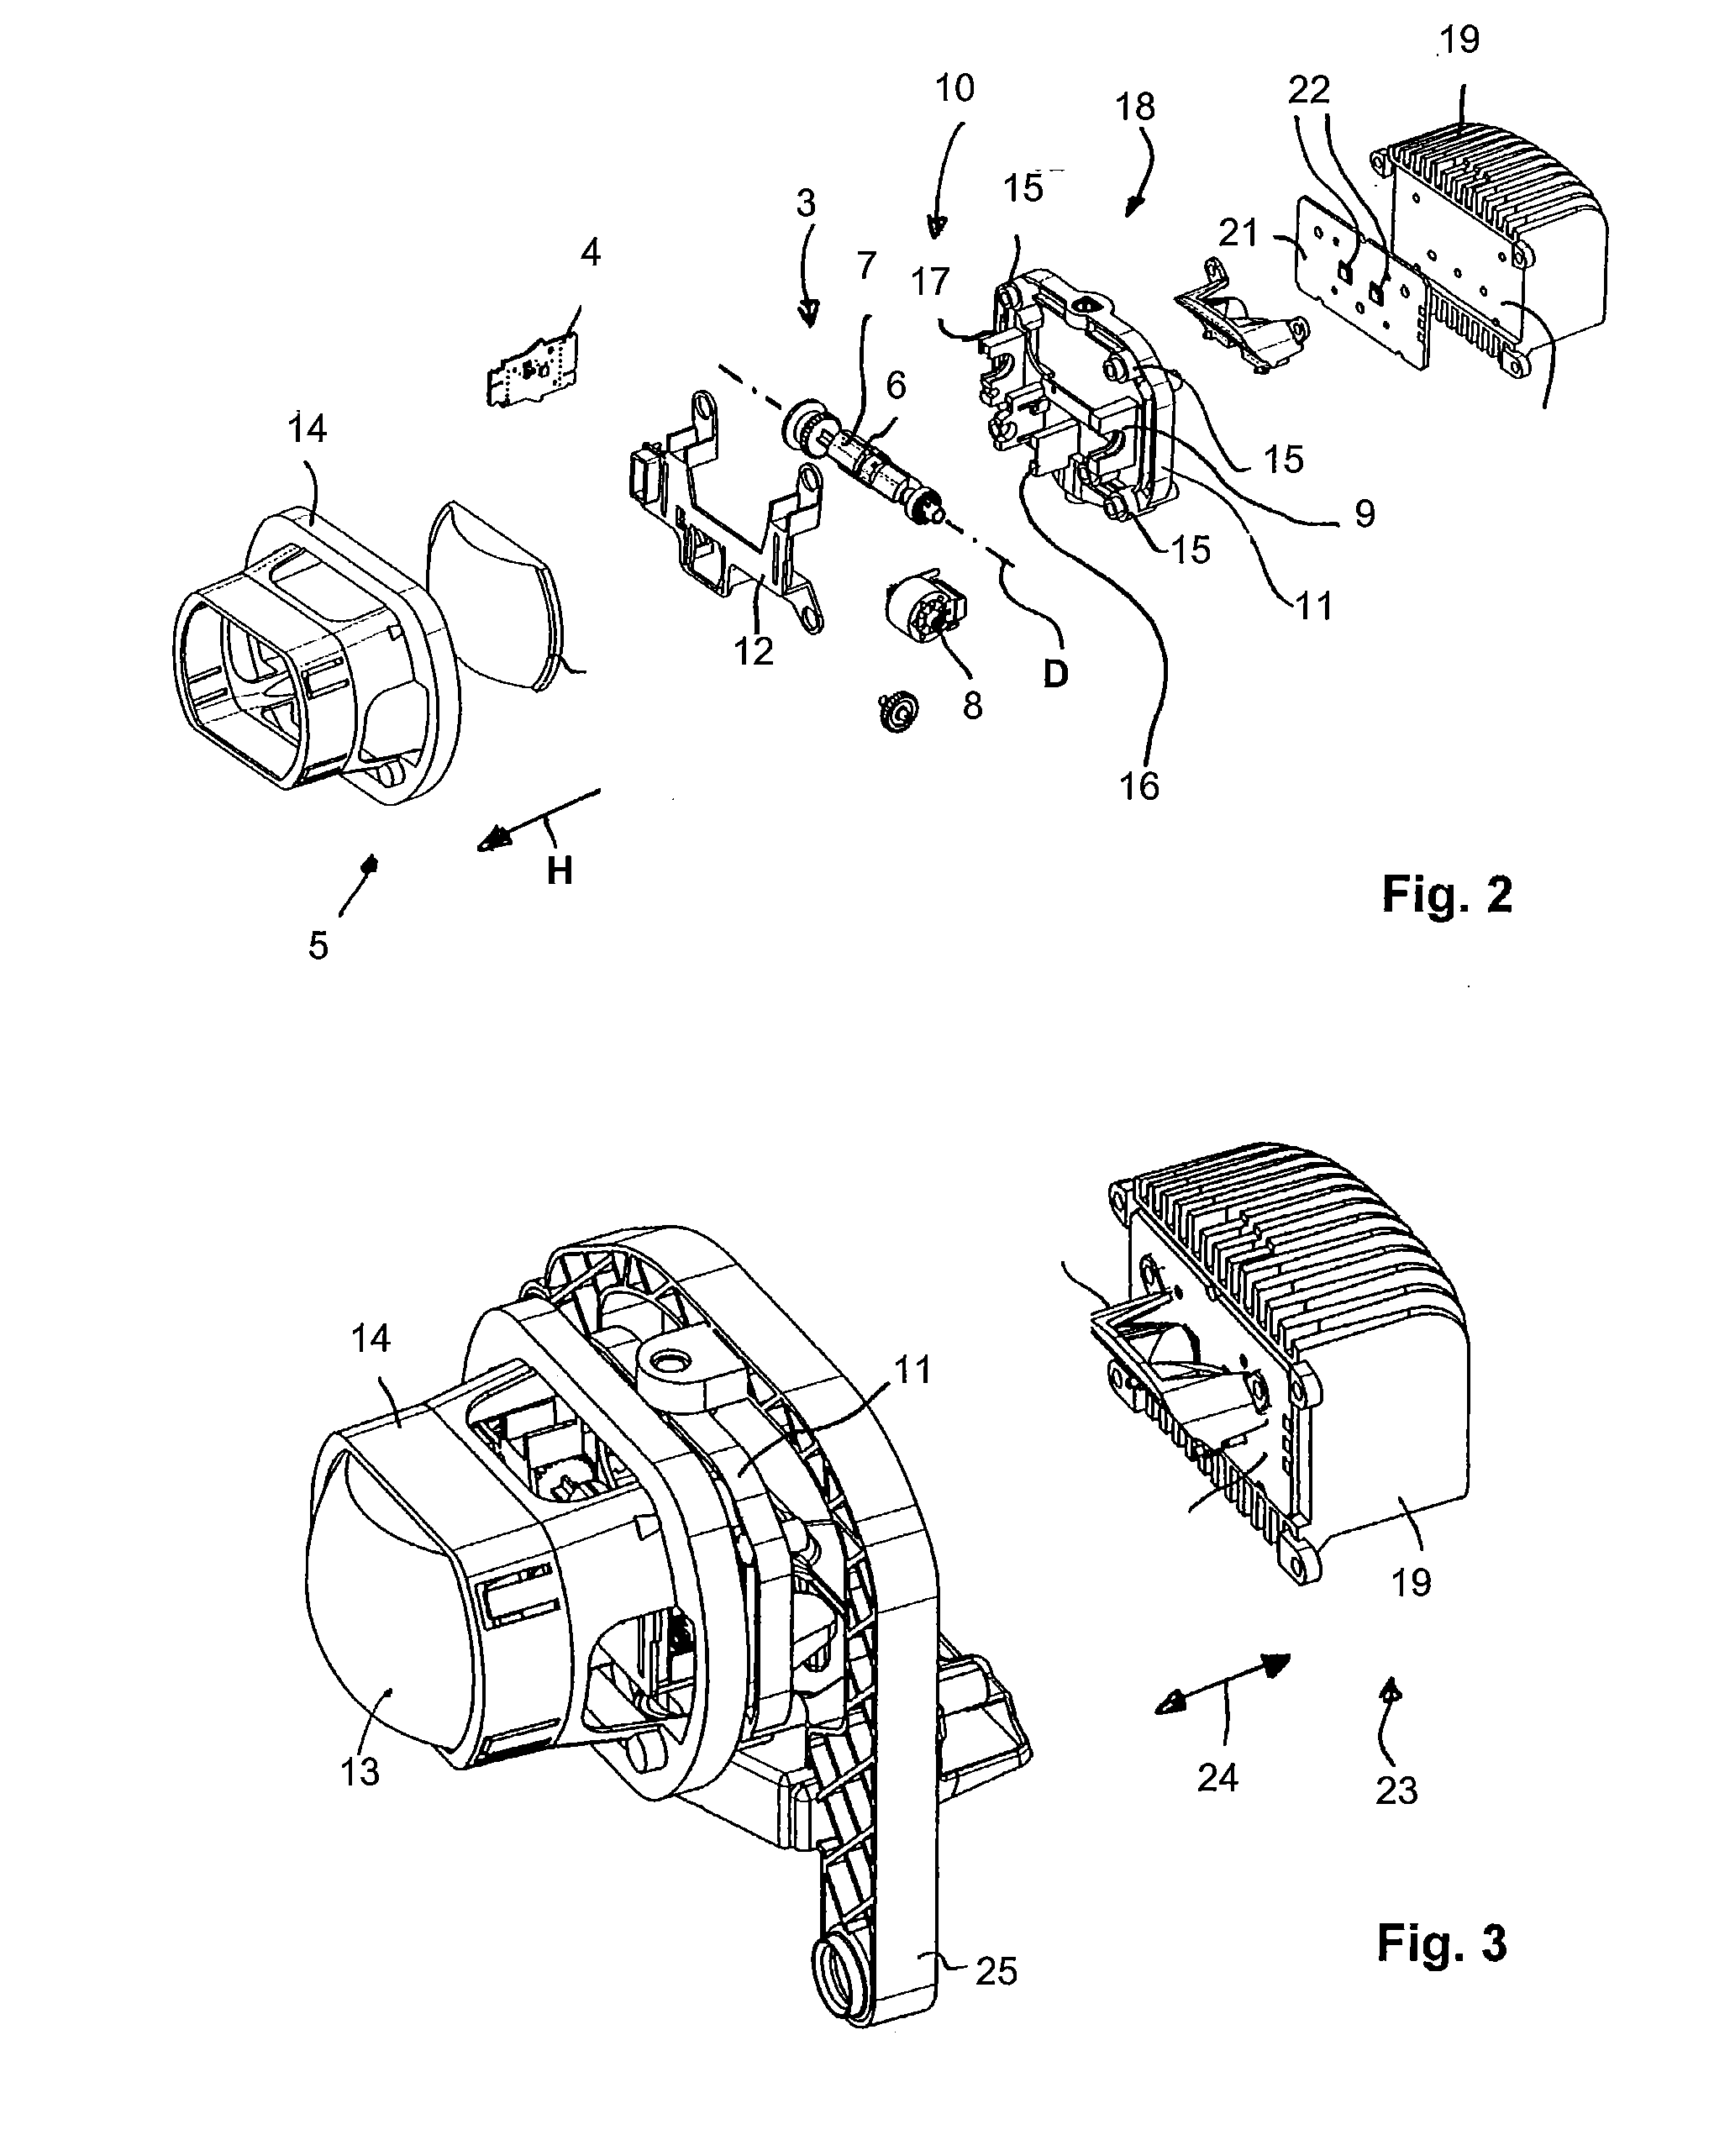 Projection headlight for motor vehicles